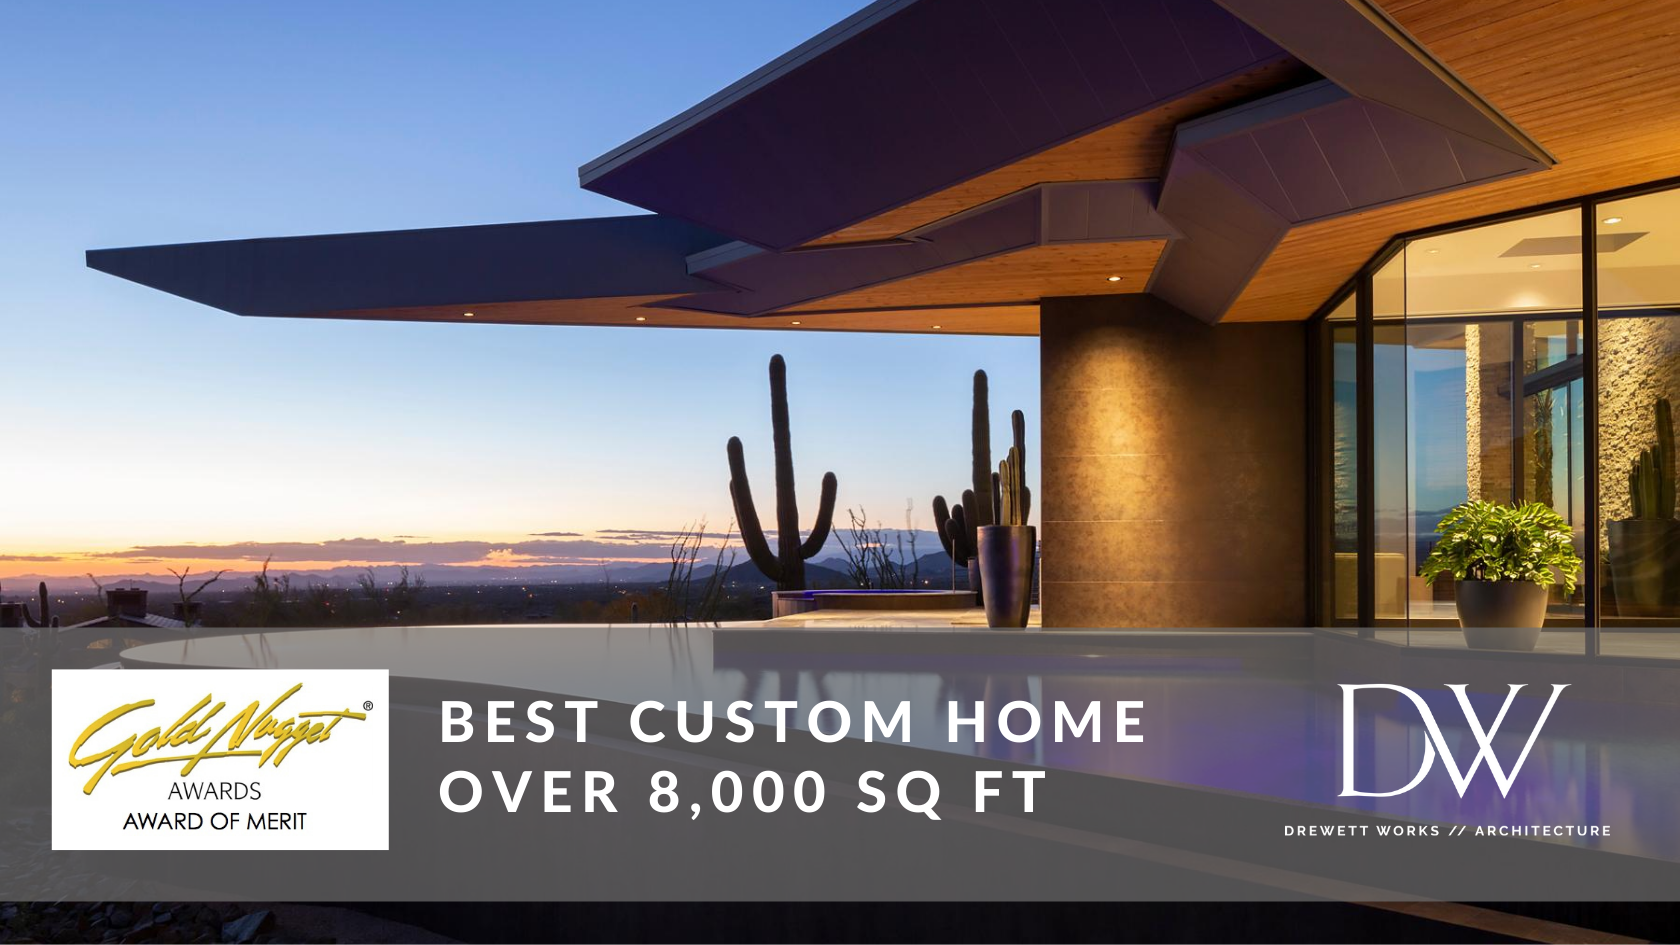 The Crusader Best Custom Home over 8000 sq ft